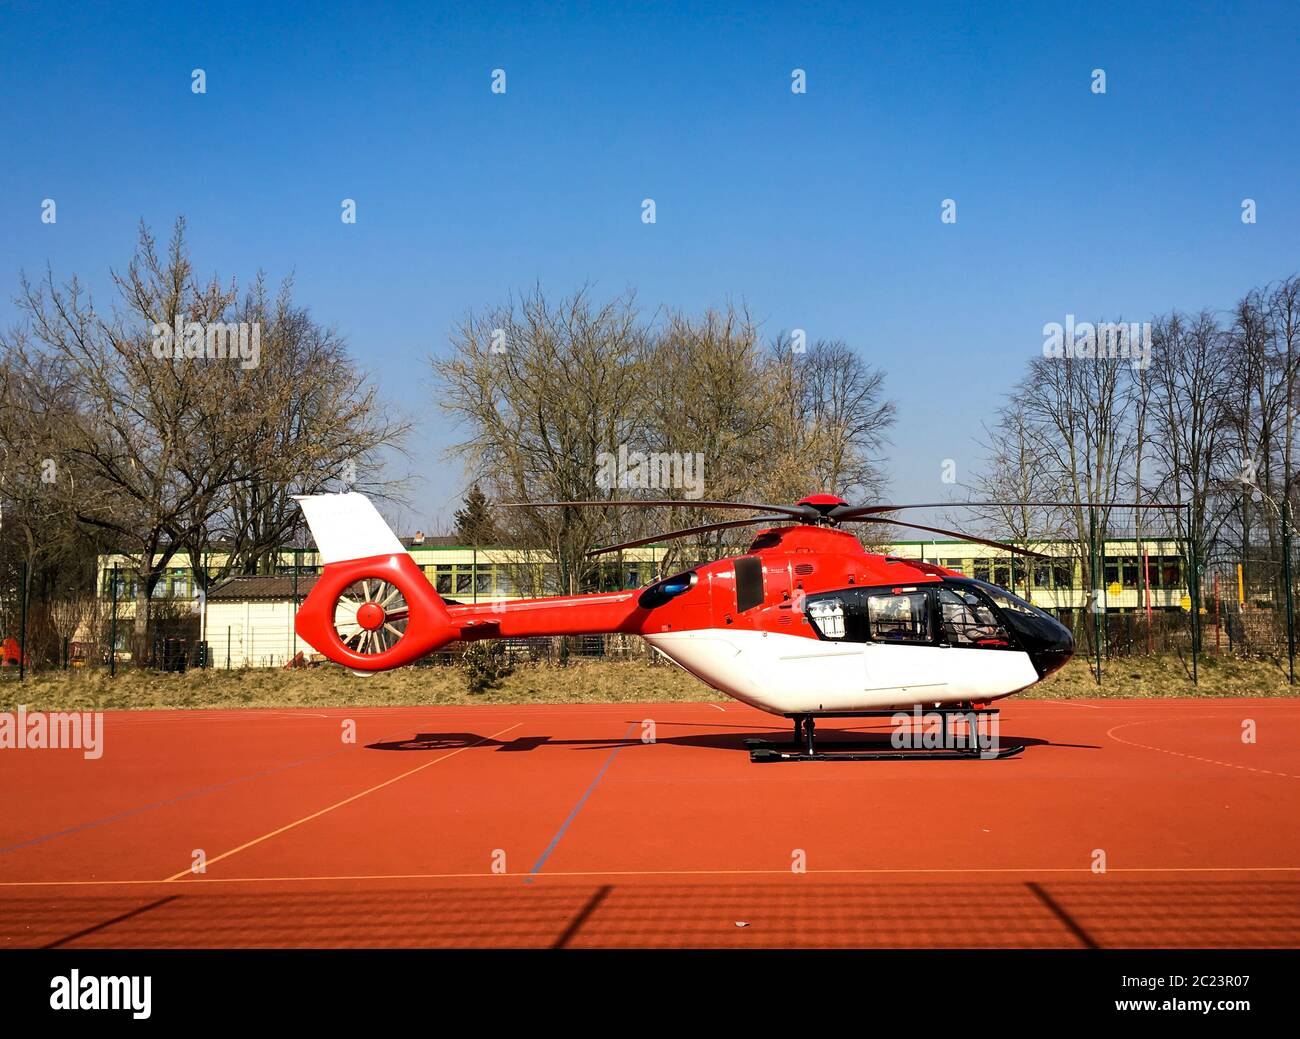 detail of a helicopter Stock Photo